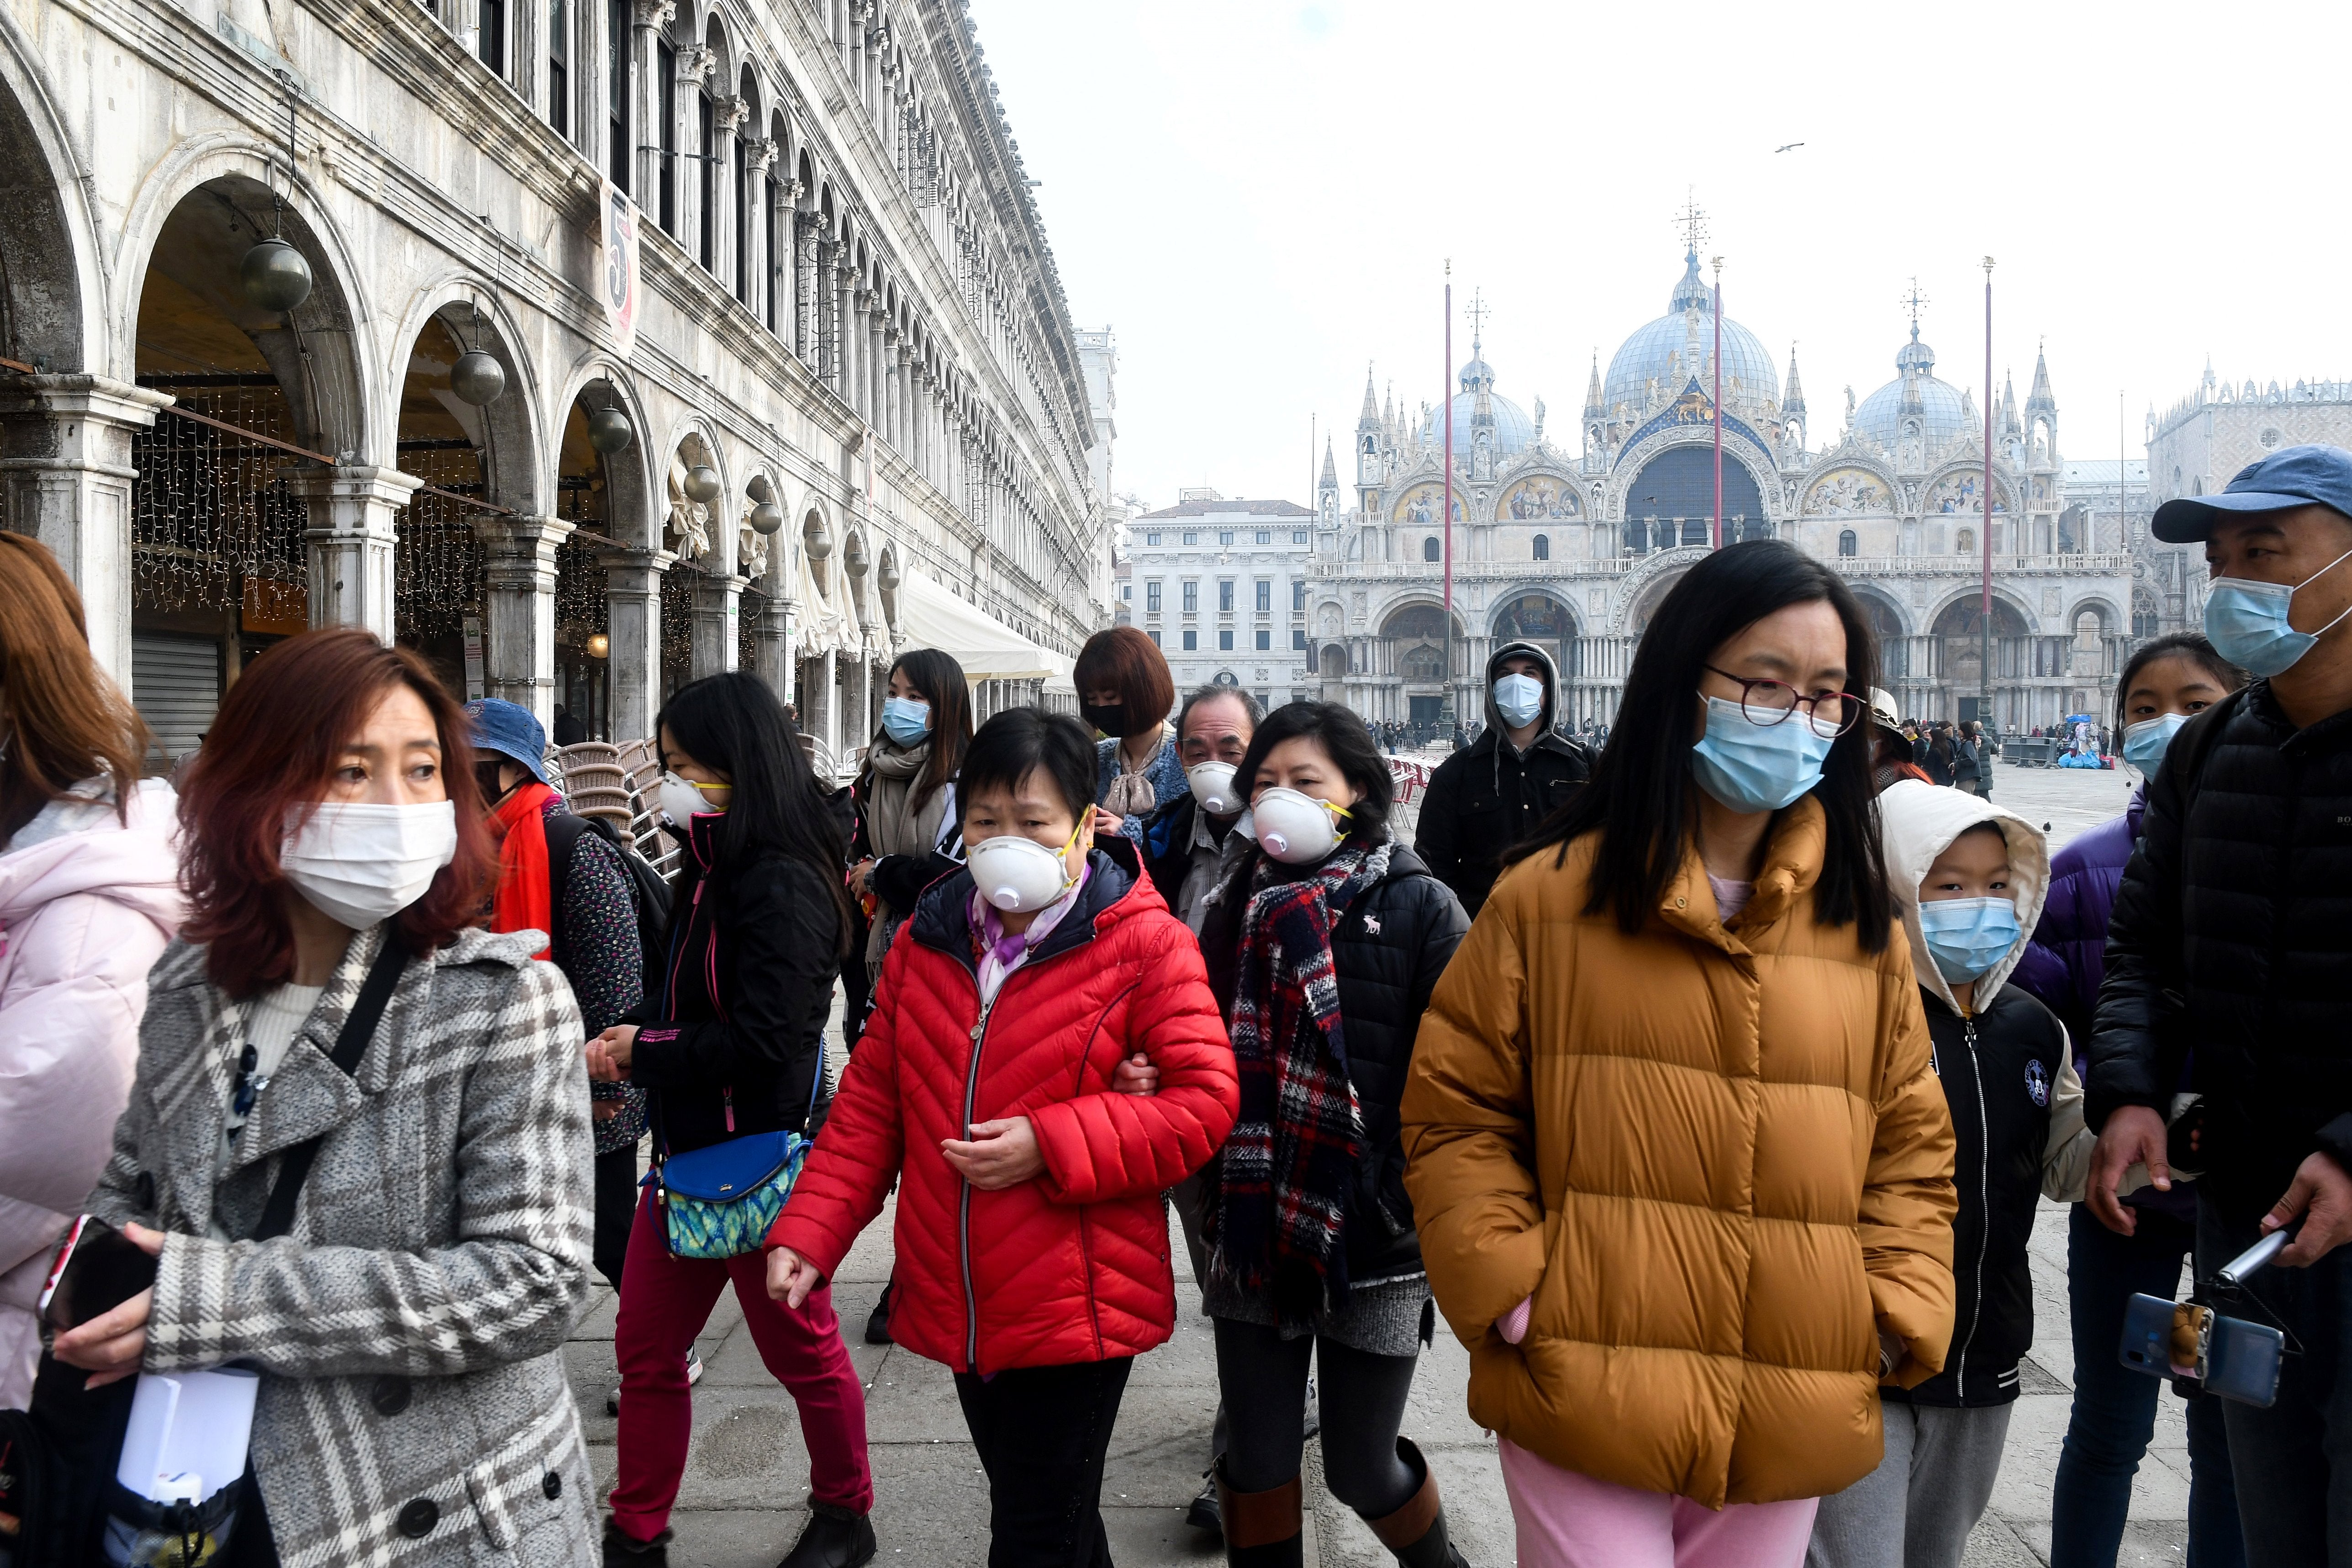 Mandatory masks were introduced in the country in October 2020